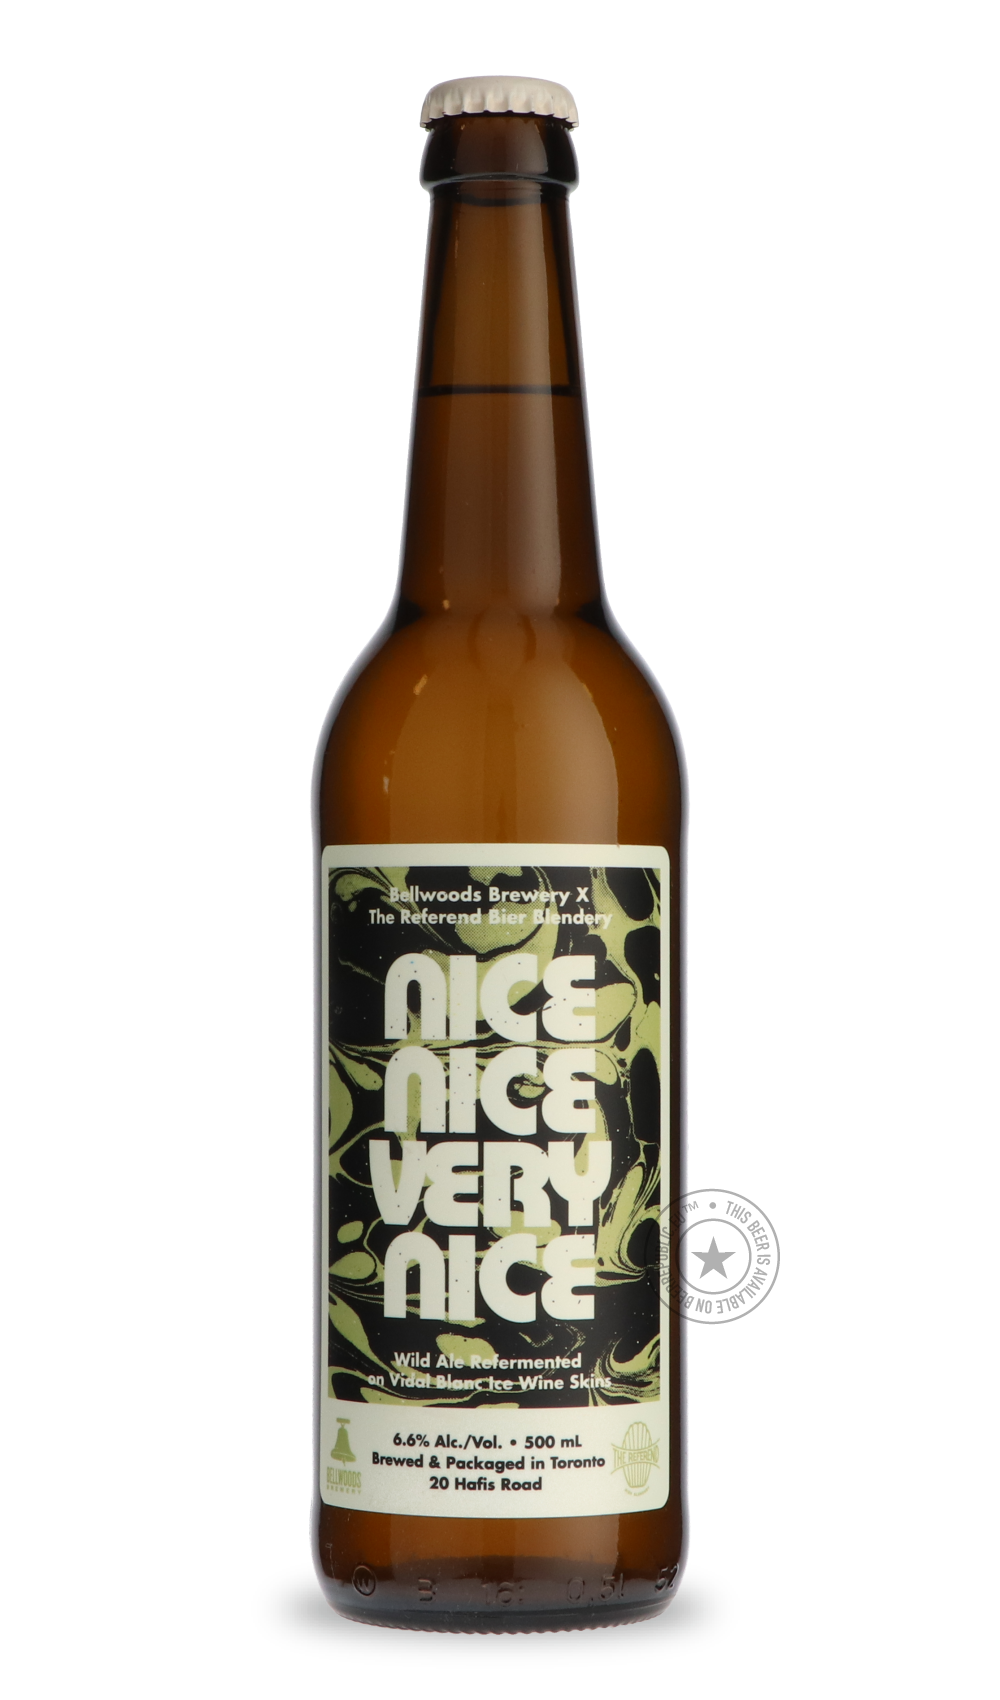 -Bellwoods- Nice Nice Very Nice / The Referend-Sour / Wild & Fruity- Only @ Beer Republic - The best online beer store for American & Canadian craft beer - Buy beer online from the USA and Canada - Bier online kopen - Amerikaans bier kopen - Craft beer store - Craft beer kopen - Amerikanisch bier kaufen - Bier online kaufen - Acheter biere online - IPA - Stout - Porter - New England IPA - Hazy IPA - Imperial Stout - Barrel Aged - Barrel Aged Imperial Stout - Brown - Dark beer - Blond - Blonde - Pilsner - La